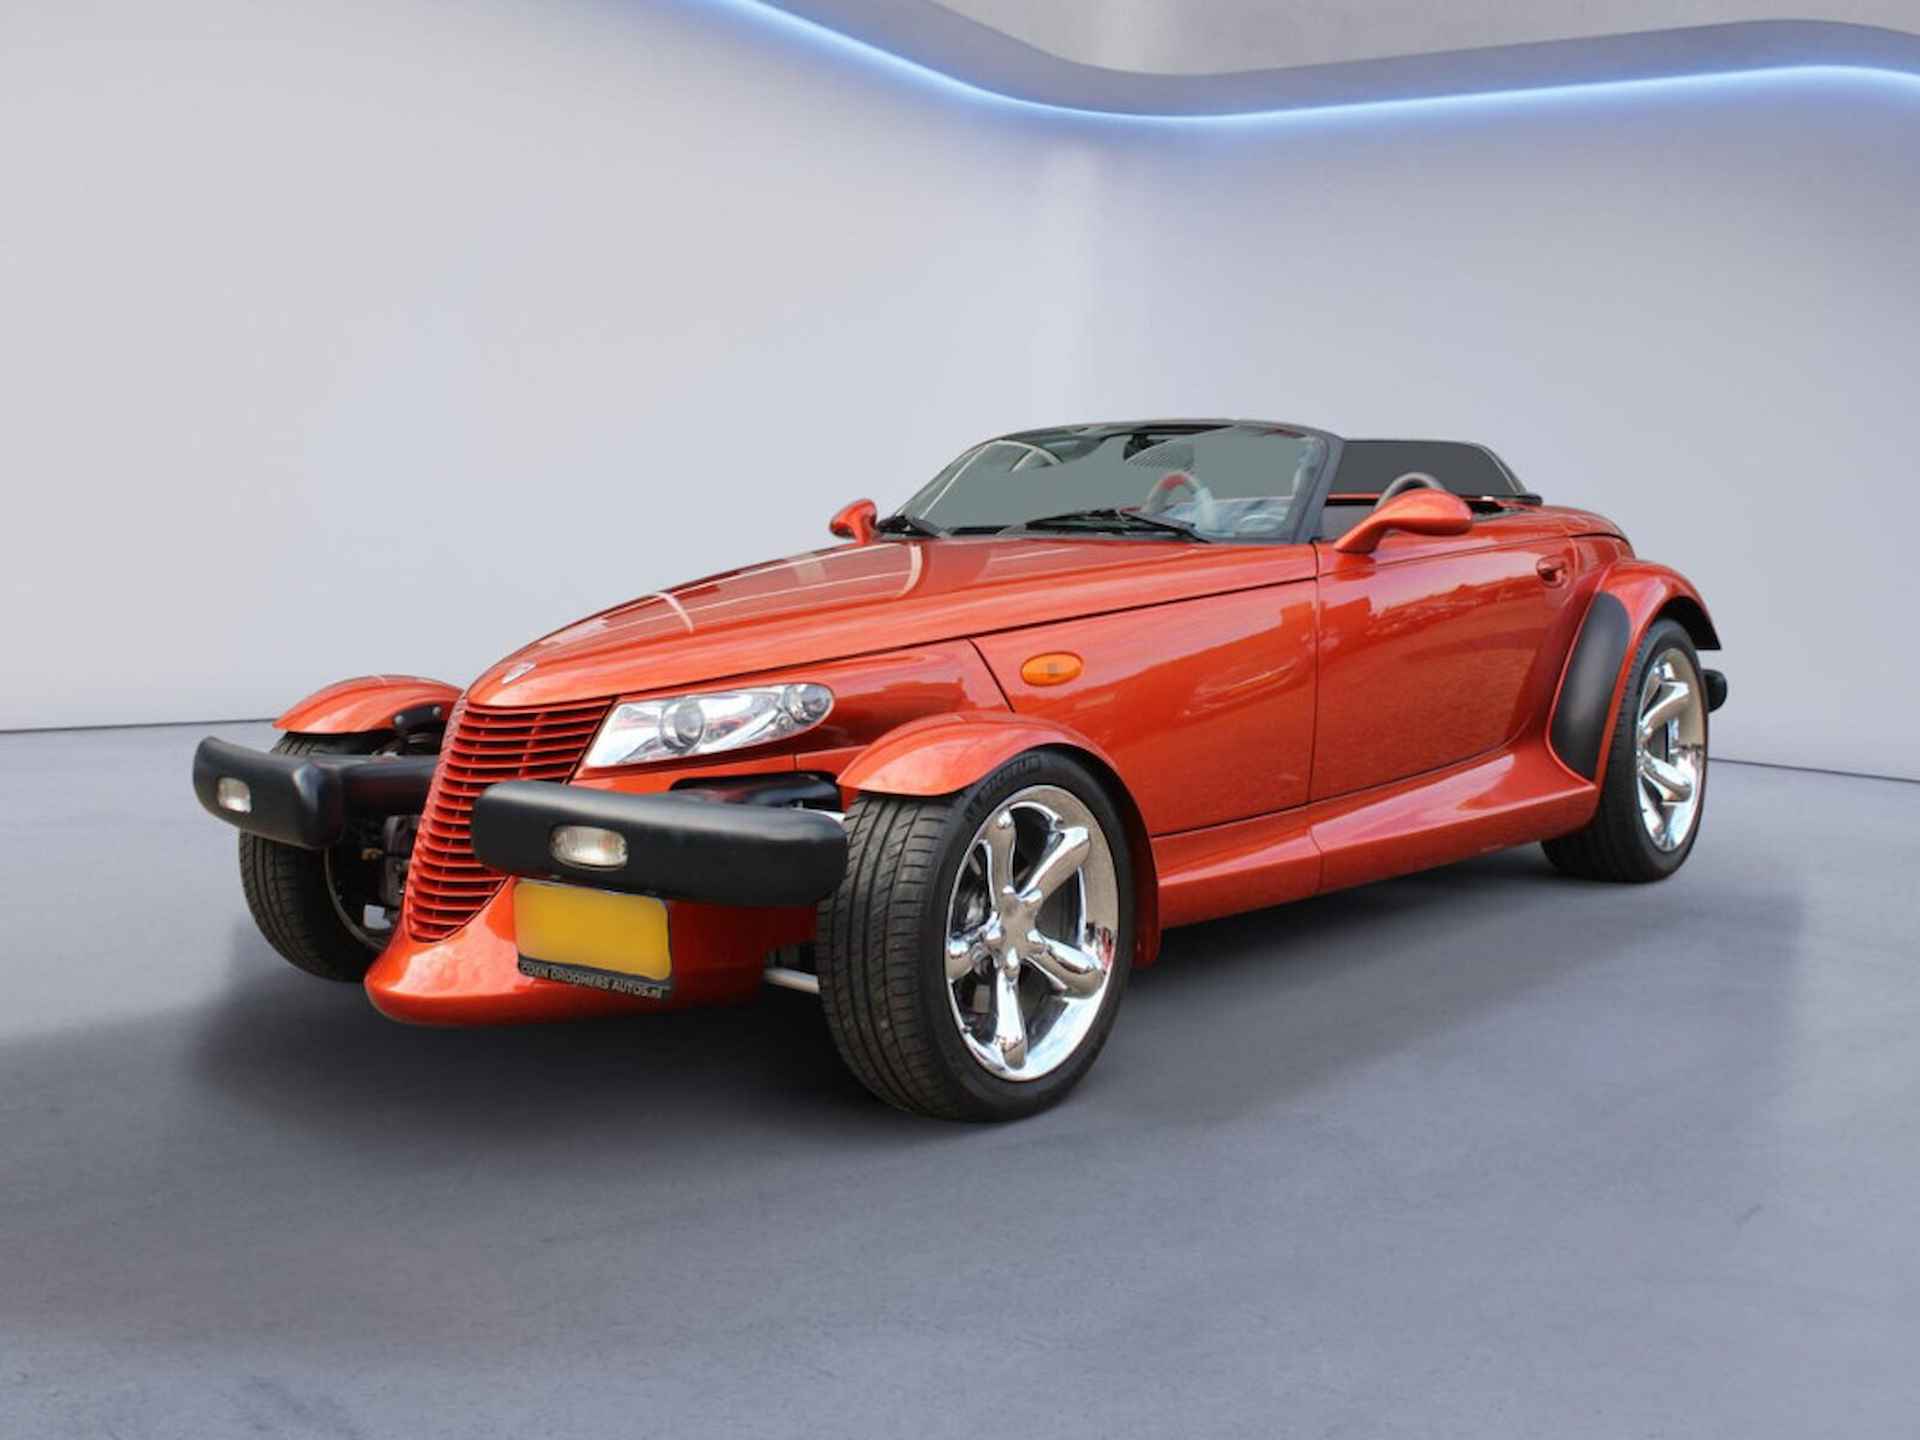 Plymouth Prowler Automaat 3.5i-V6 Youngtimer Nieuwe Cabriokap, Wind scherm Auto is in Concoursstaat. - 17/17